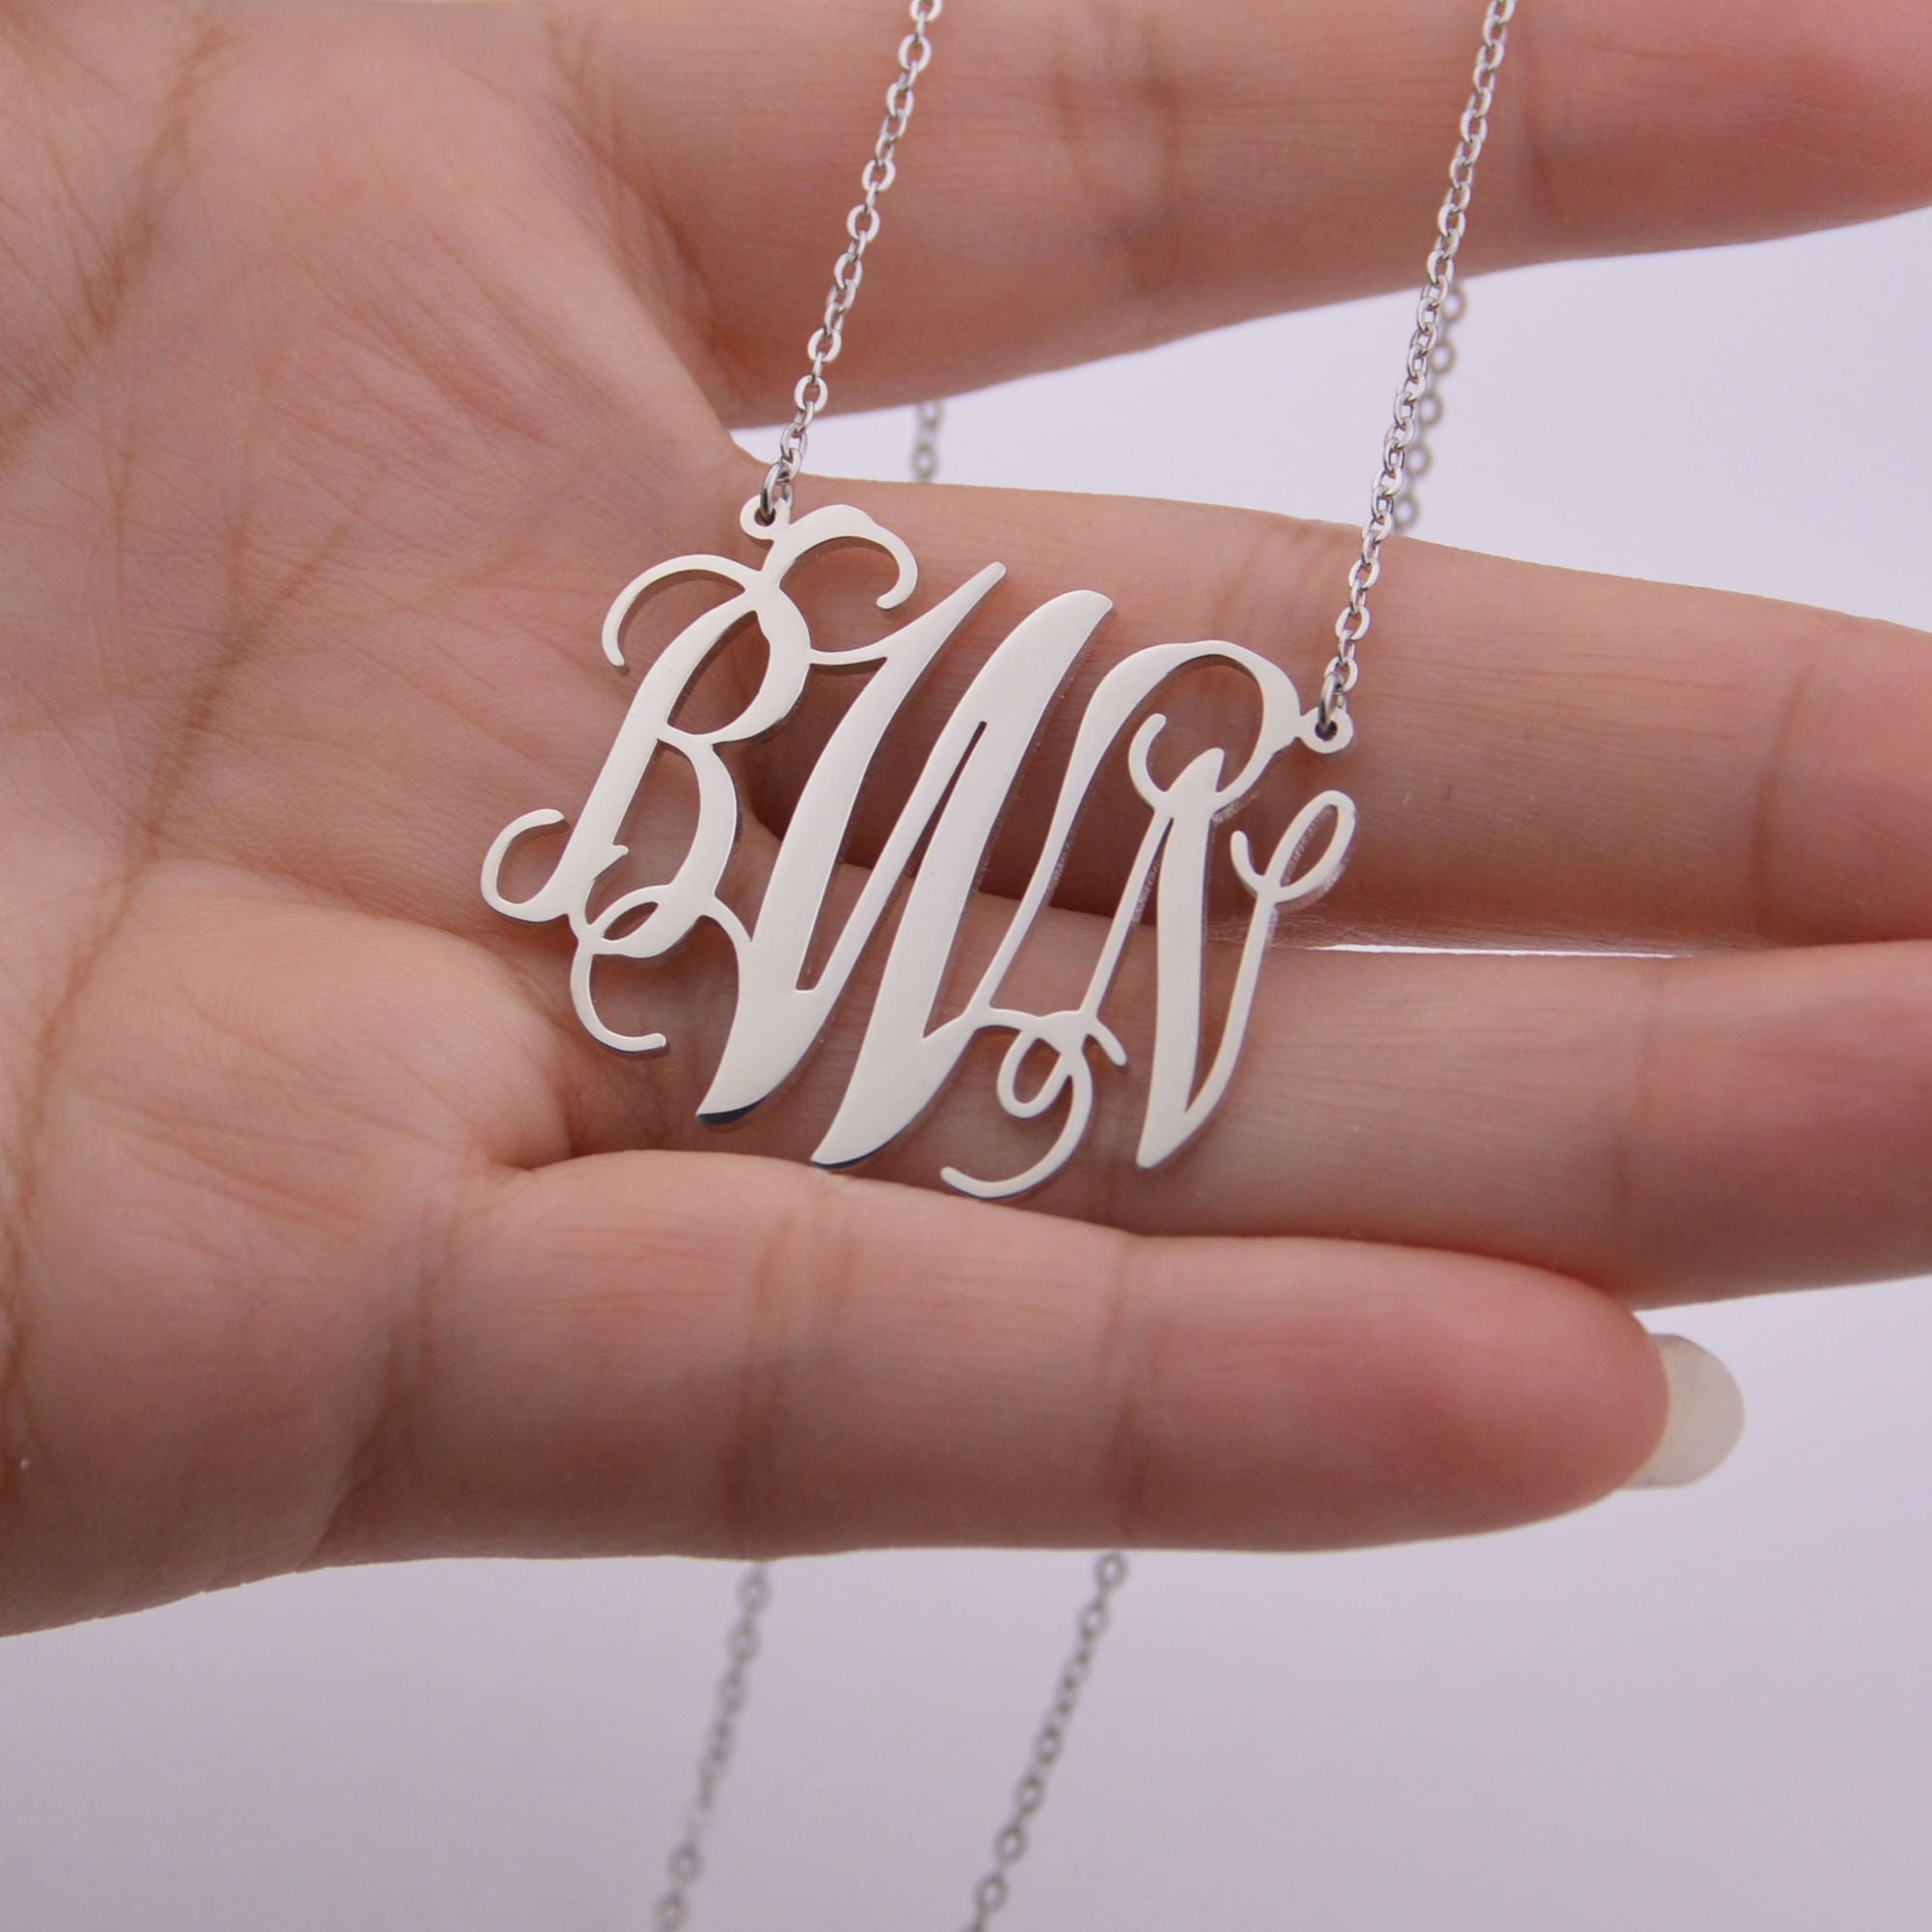 Monogram Necklace – Personalized Monogrammed Jewelry, Sterling Silver,  Bridesmaids Gift, Initials Pendant